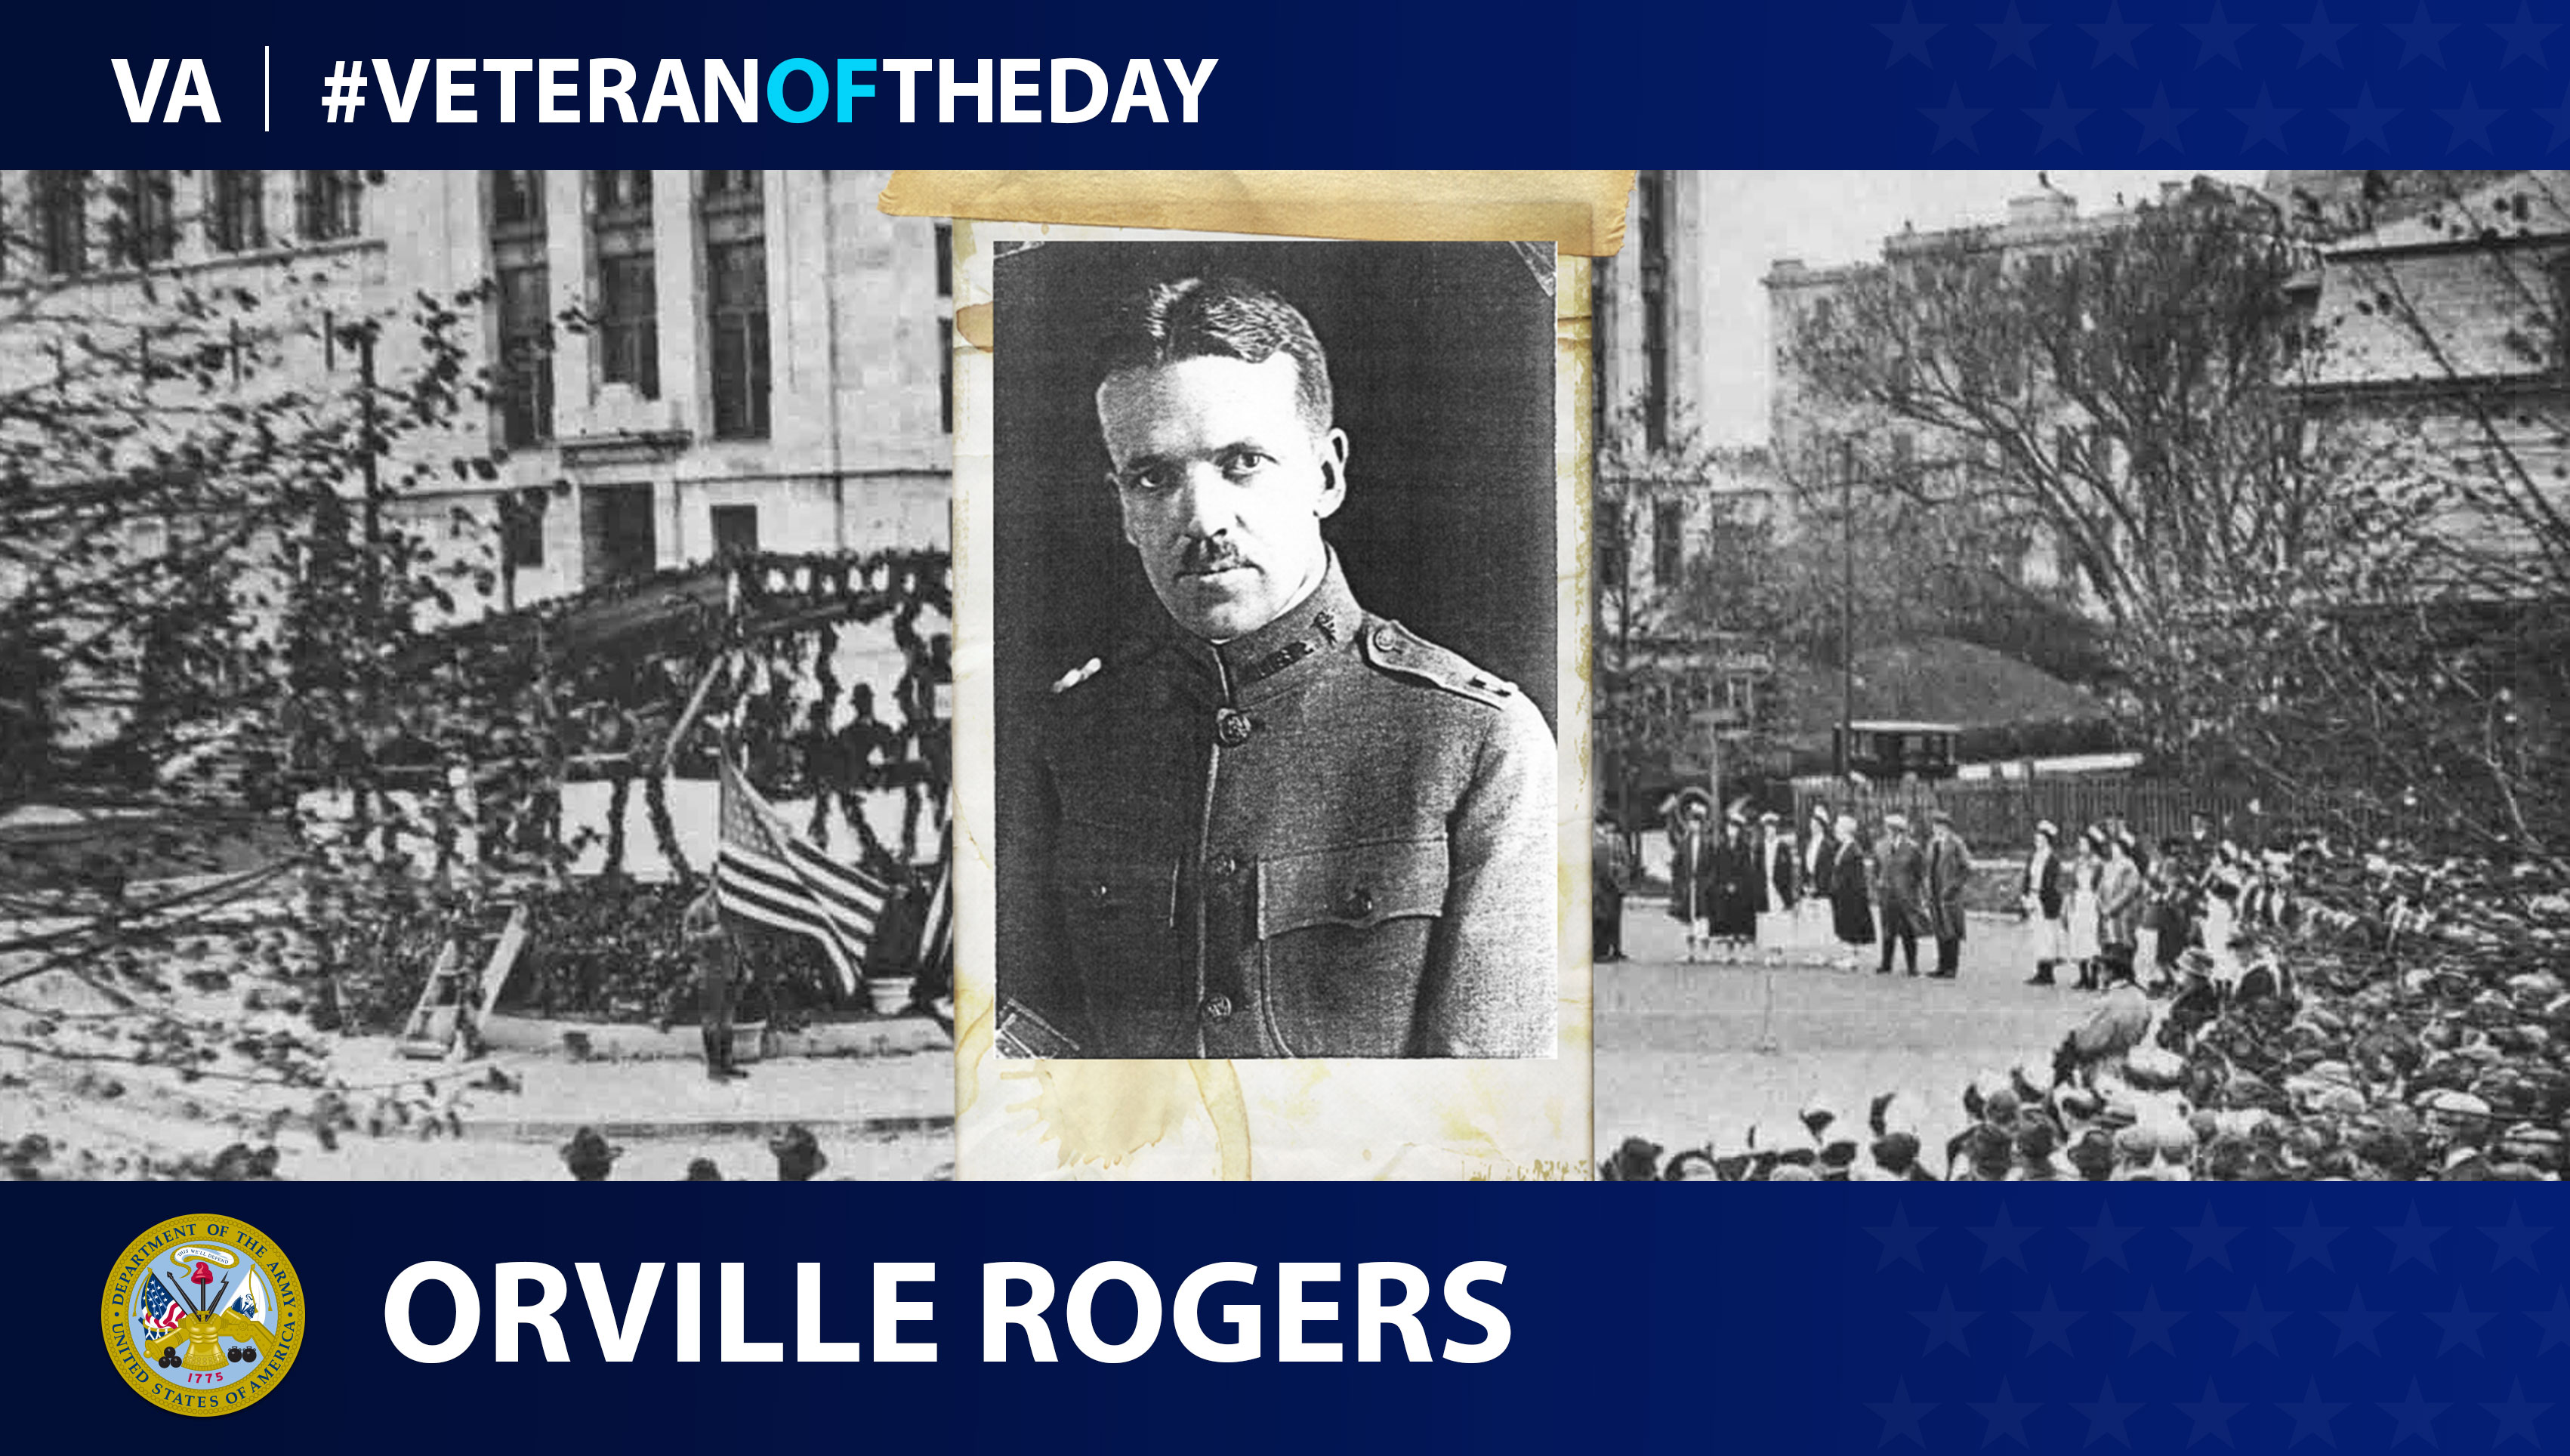 Army Veteran Orville F. Rogers is today's Veteran of the Day.